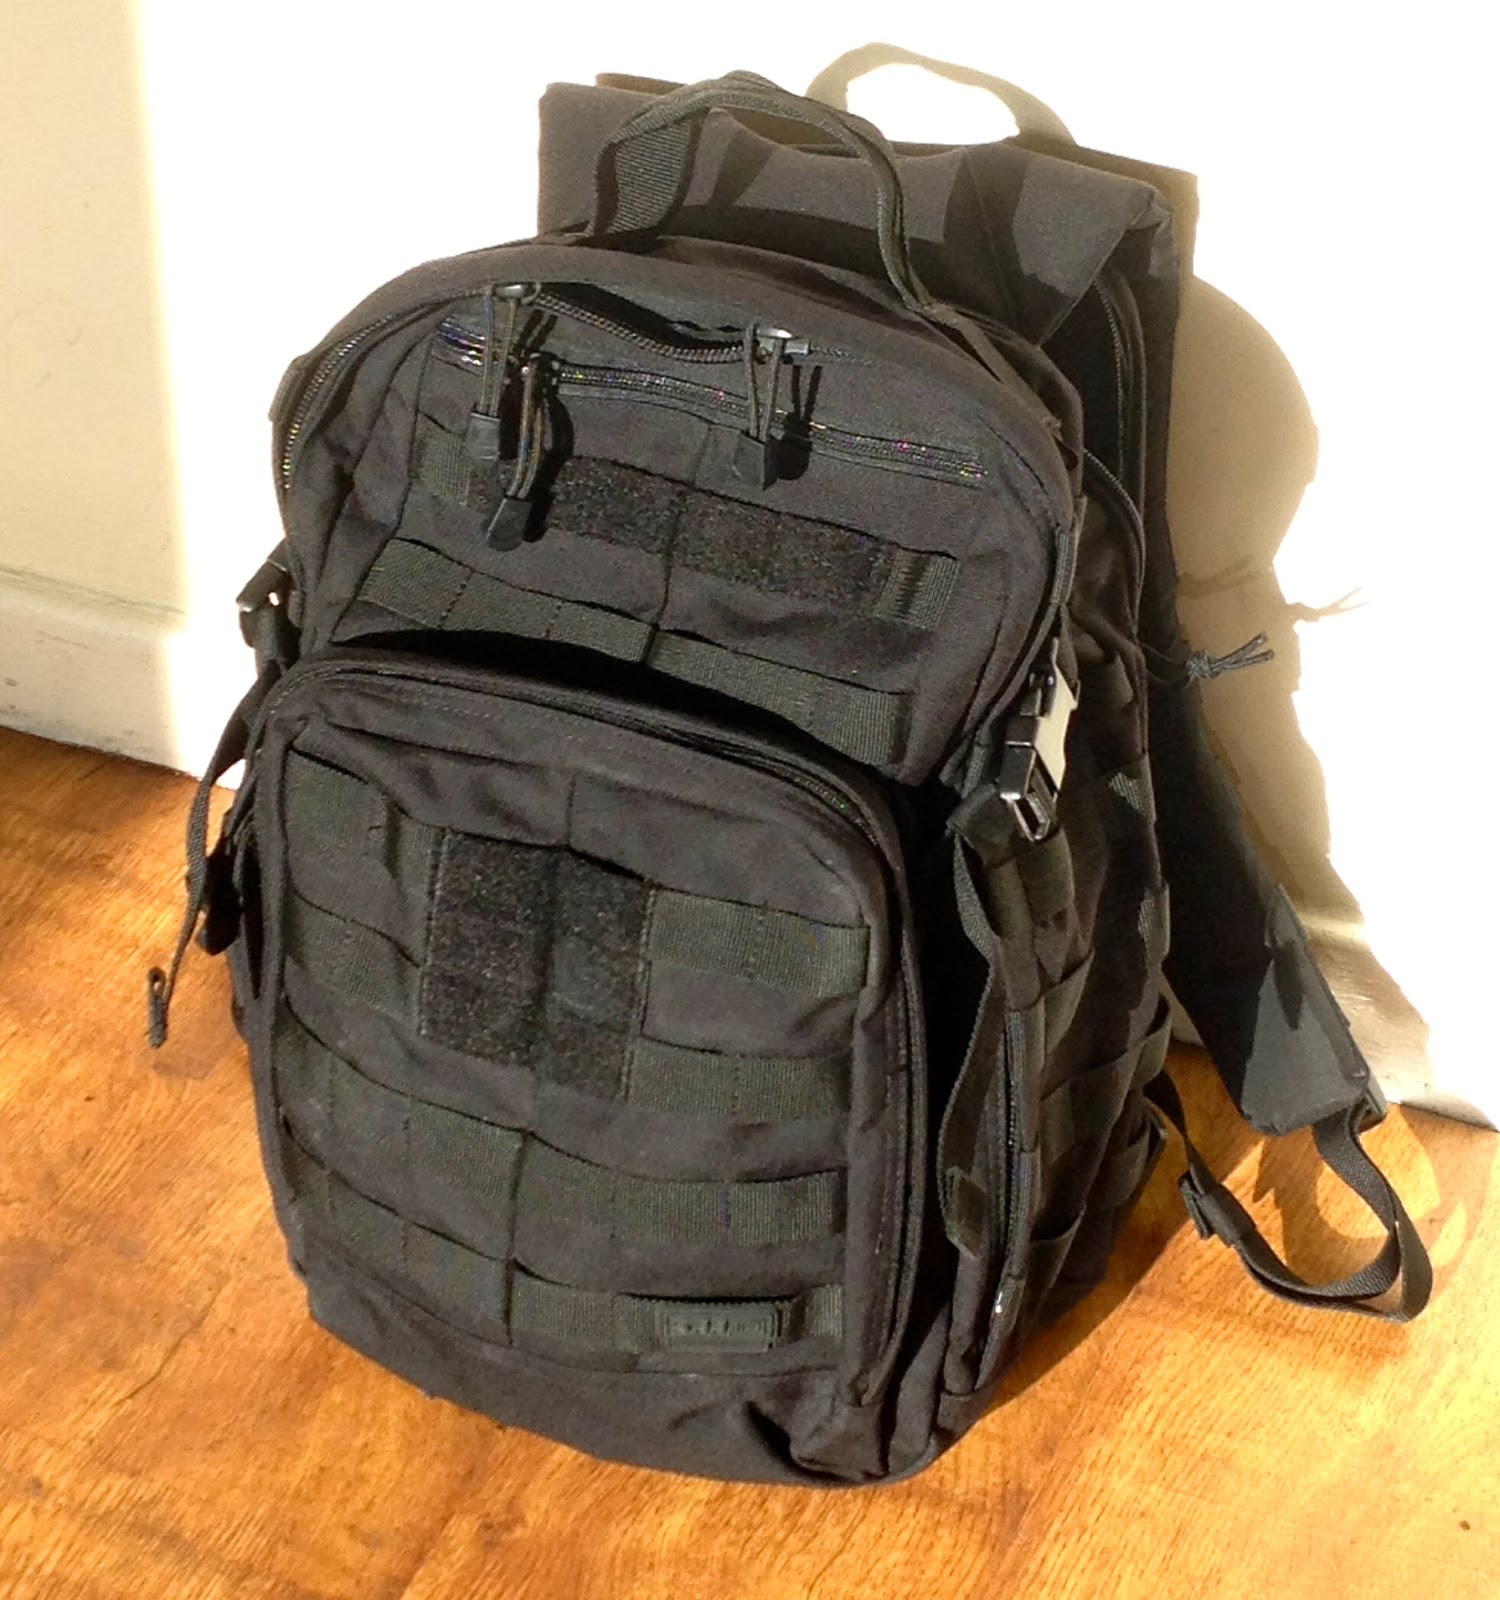 Unboxing Review: 5.11 Tactical RUSH 12 |The Suburban Bushwacker: From ...